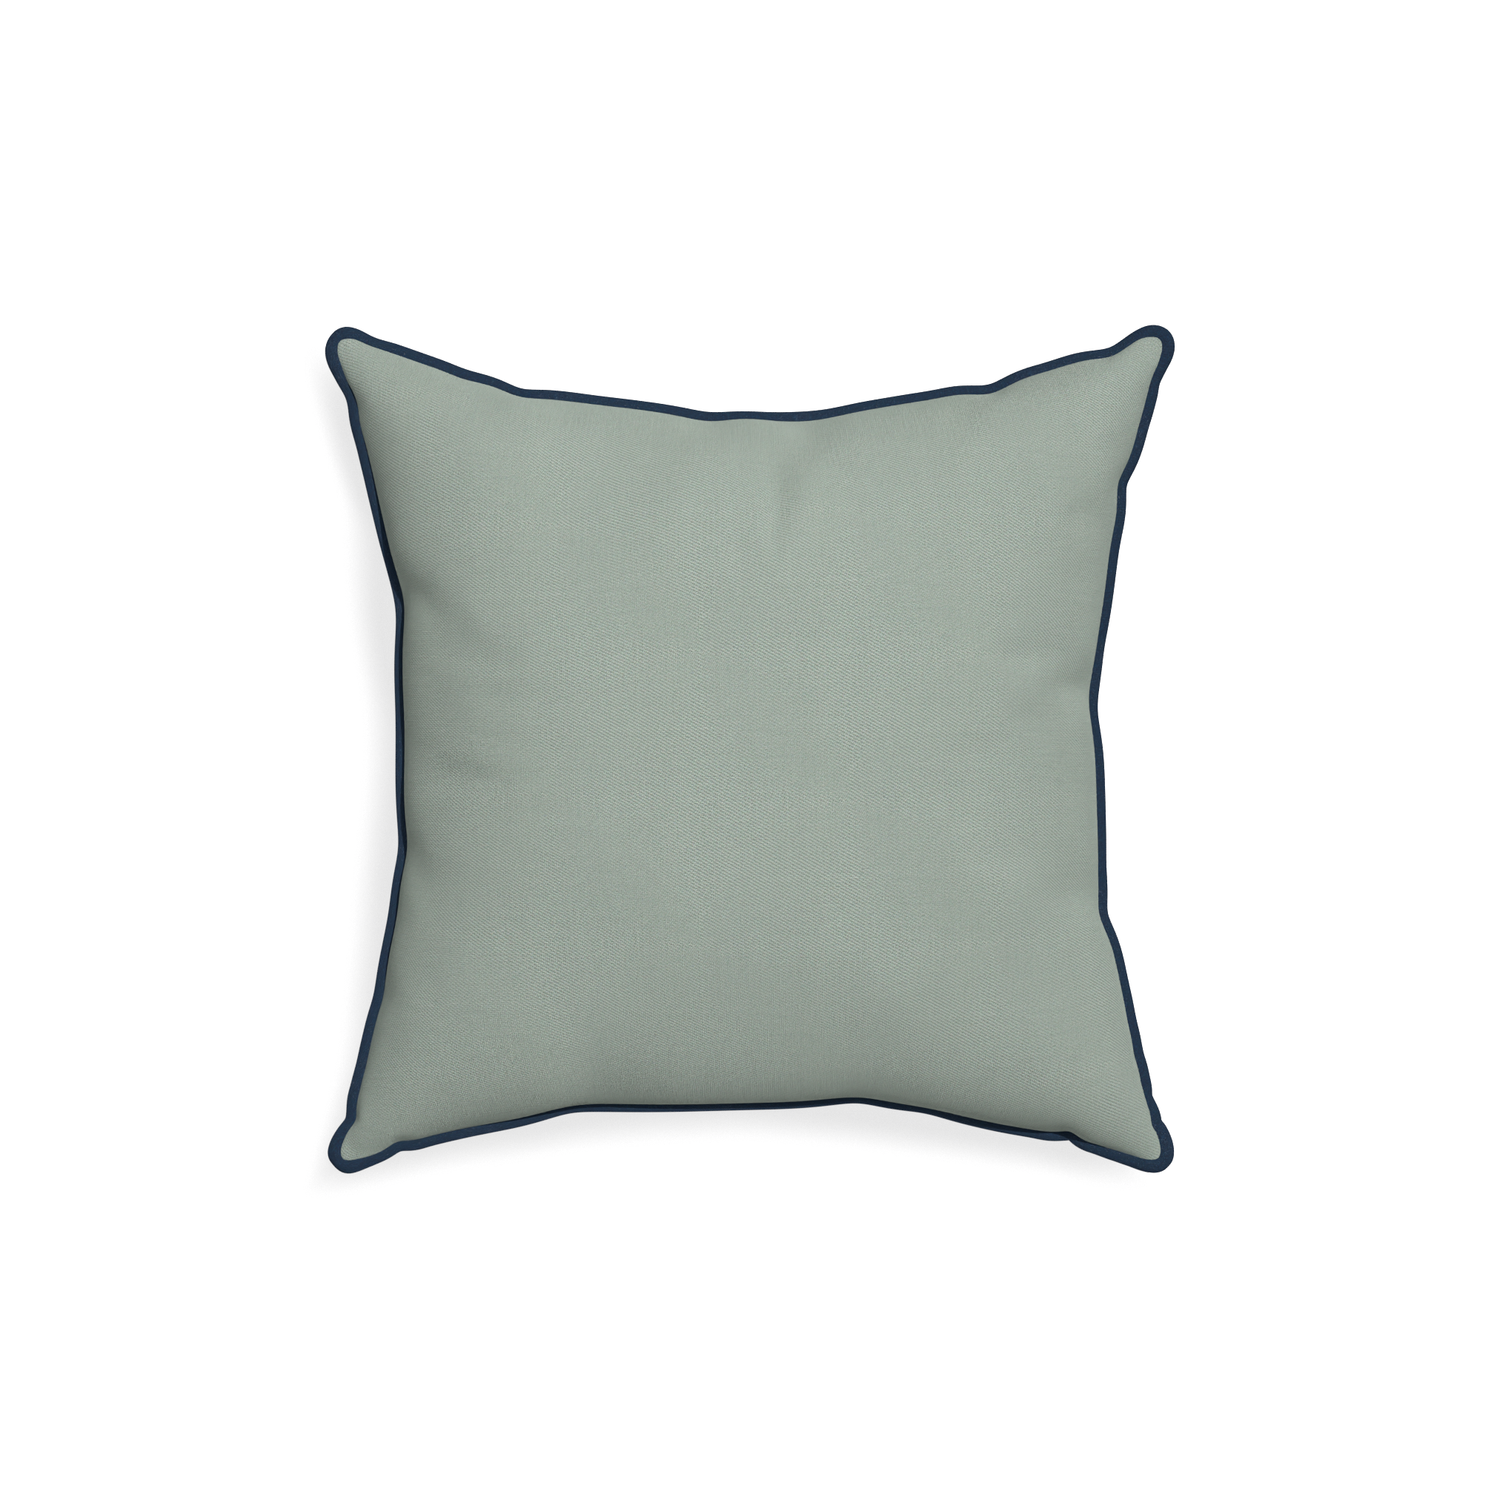 18-square sage custom sage green cottonpillow with c piping on white background